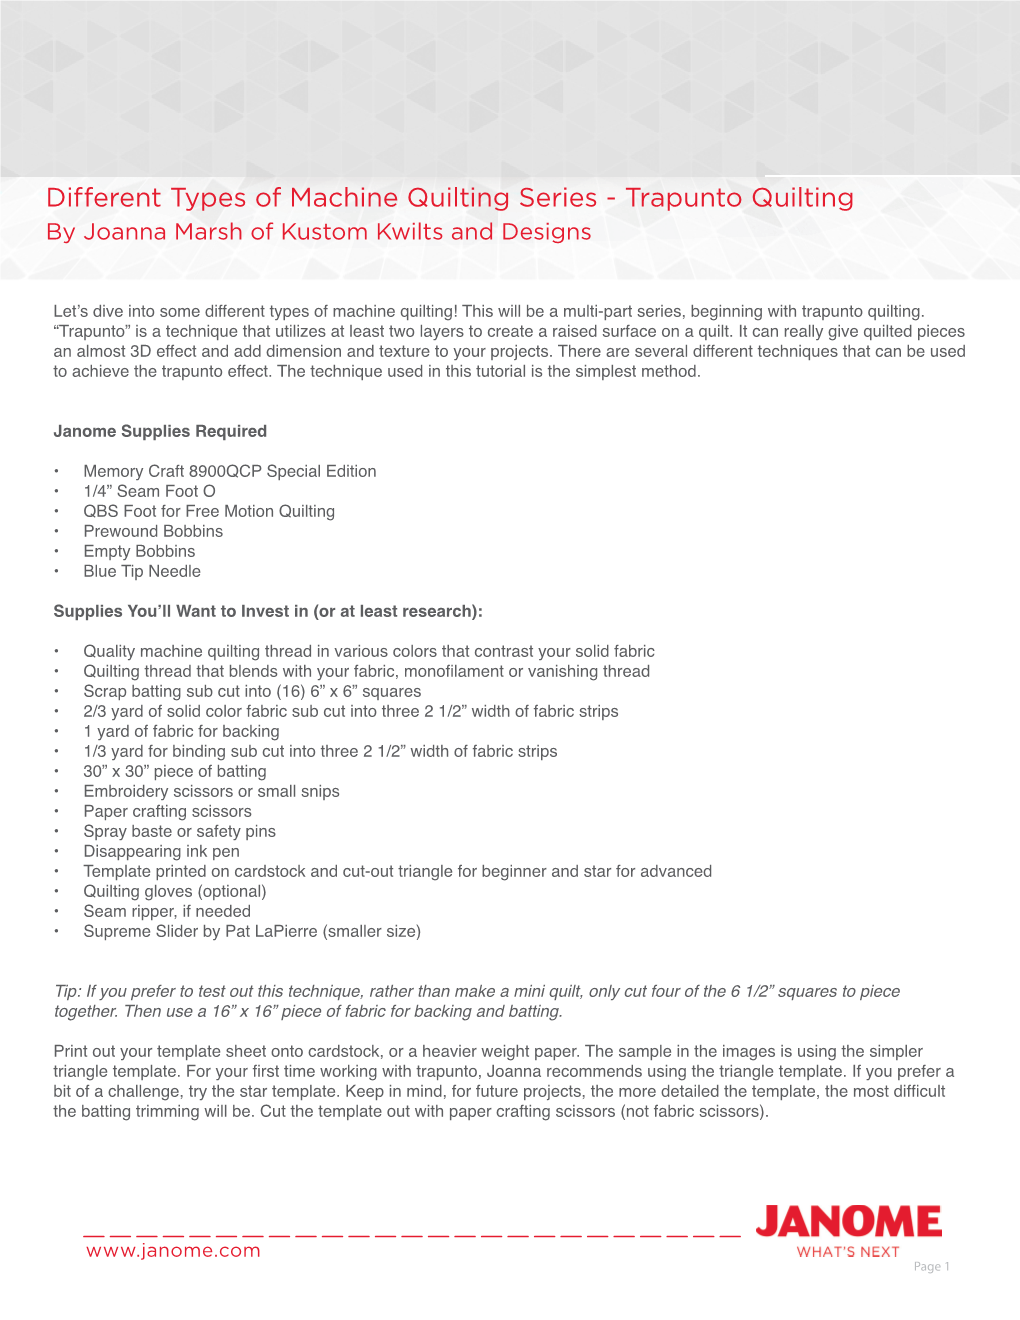 Different Types of Machine Quilting Series - Trapunto Quilting by Joanna Marsh of Kustom Kwilts and Designs